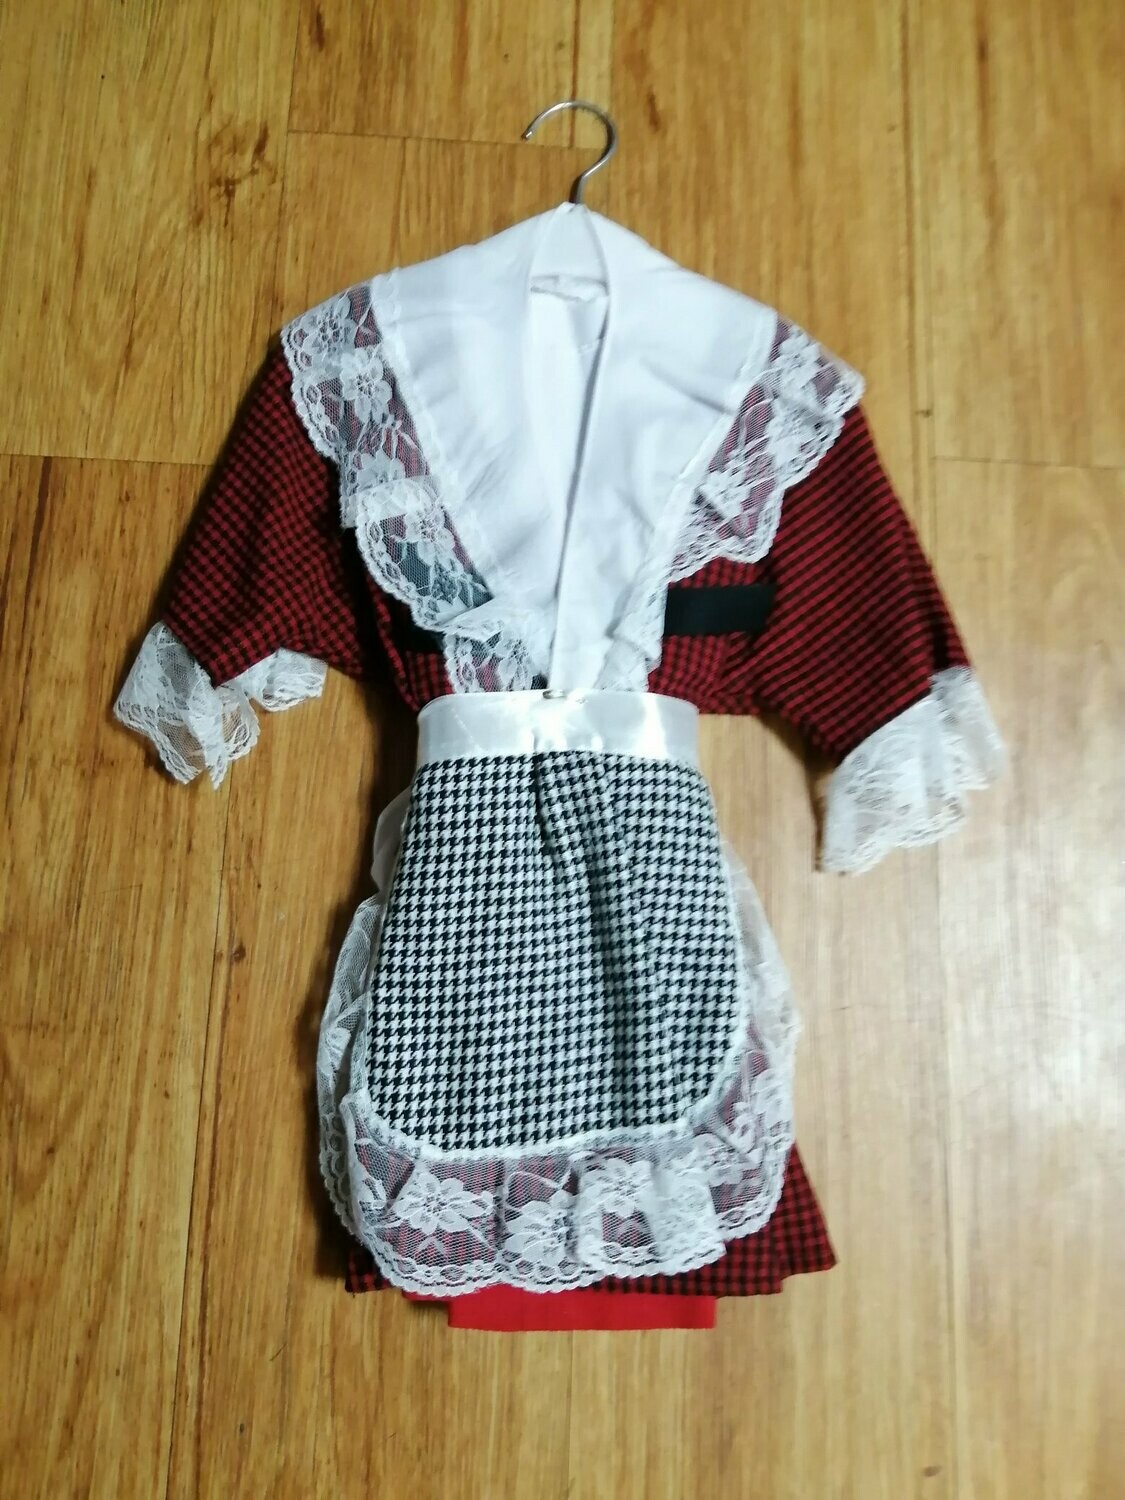 Girl's Welsh Costume (Style #1), Size: 0-6 Months